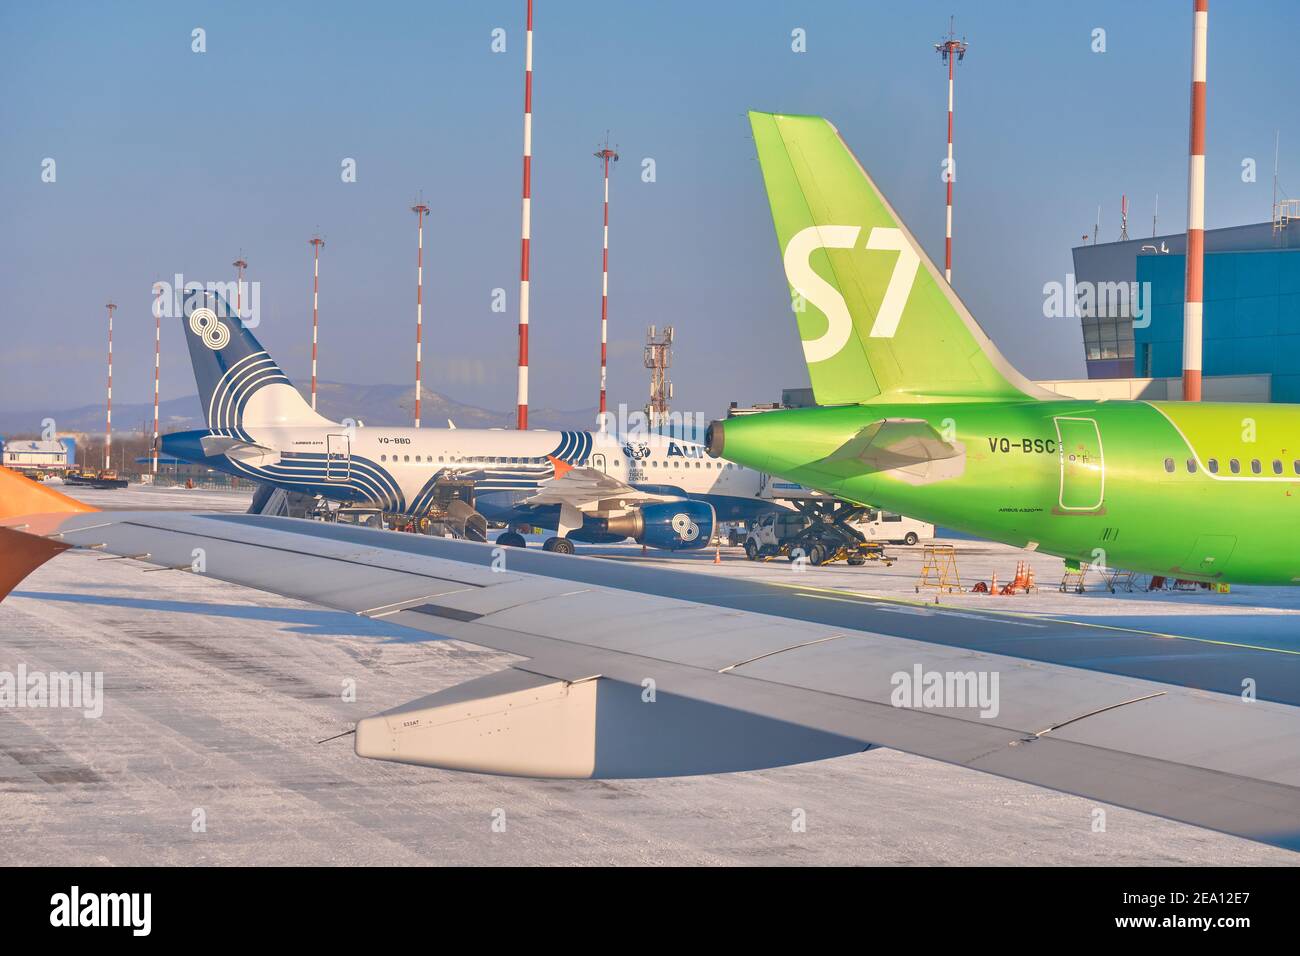 Vladivostok, RUSSIA - Jan 30, 2021: Aircraft Airbus A320neo VQ-BRB S7 airline lands at the airport of Khabarovsk. Stock Photo